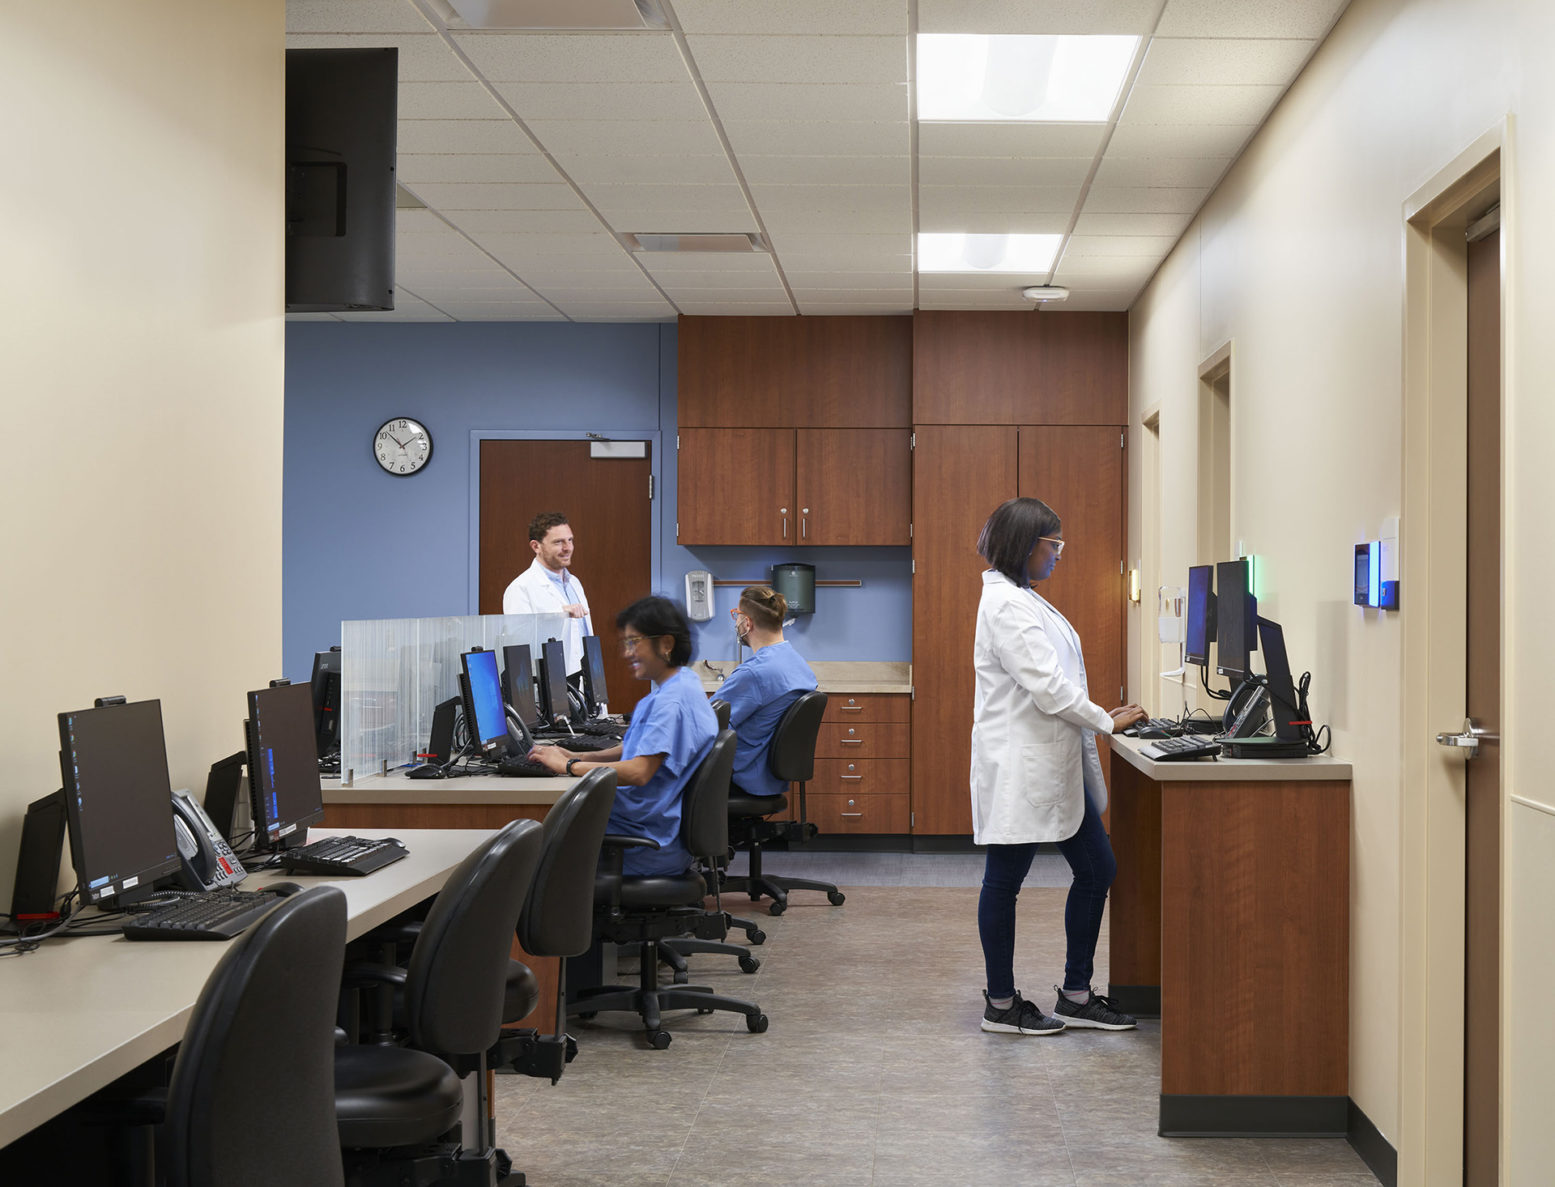 Truman Medical Center University II work stations with people